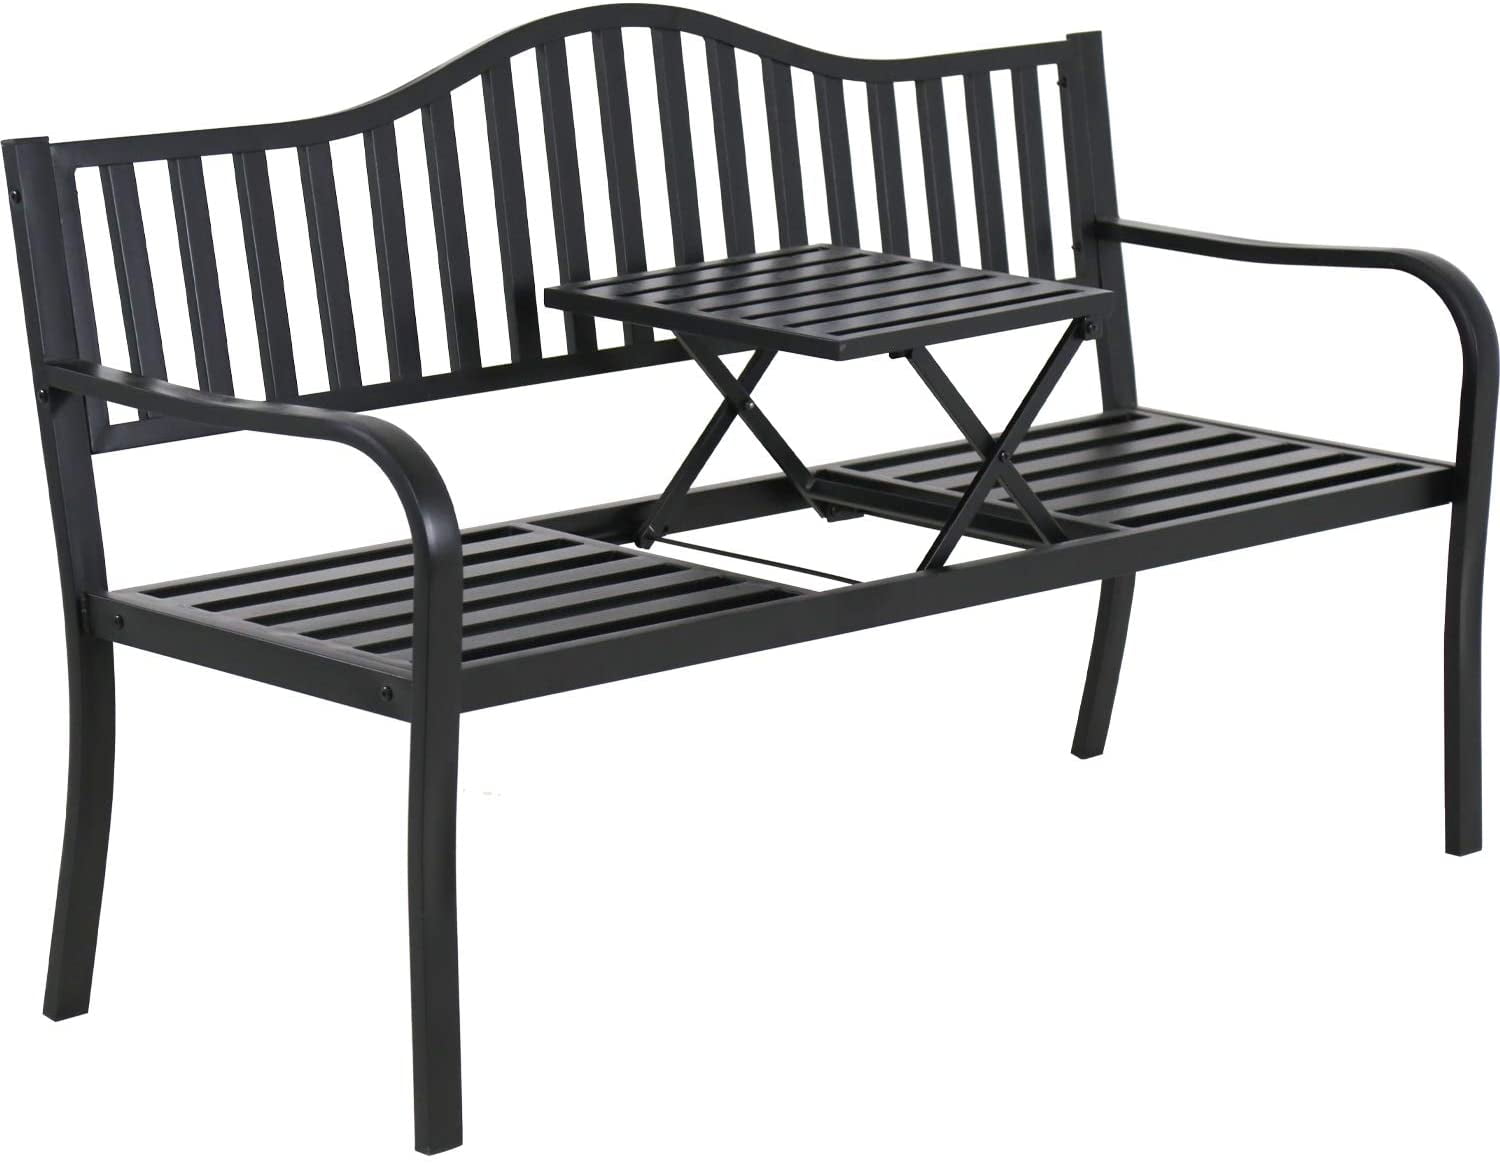 Buy Park Bench Metal Bench Garden Bench Chair Outdoor Benches Clearance Patio Bench Yard Bench